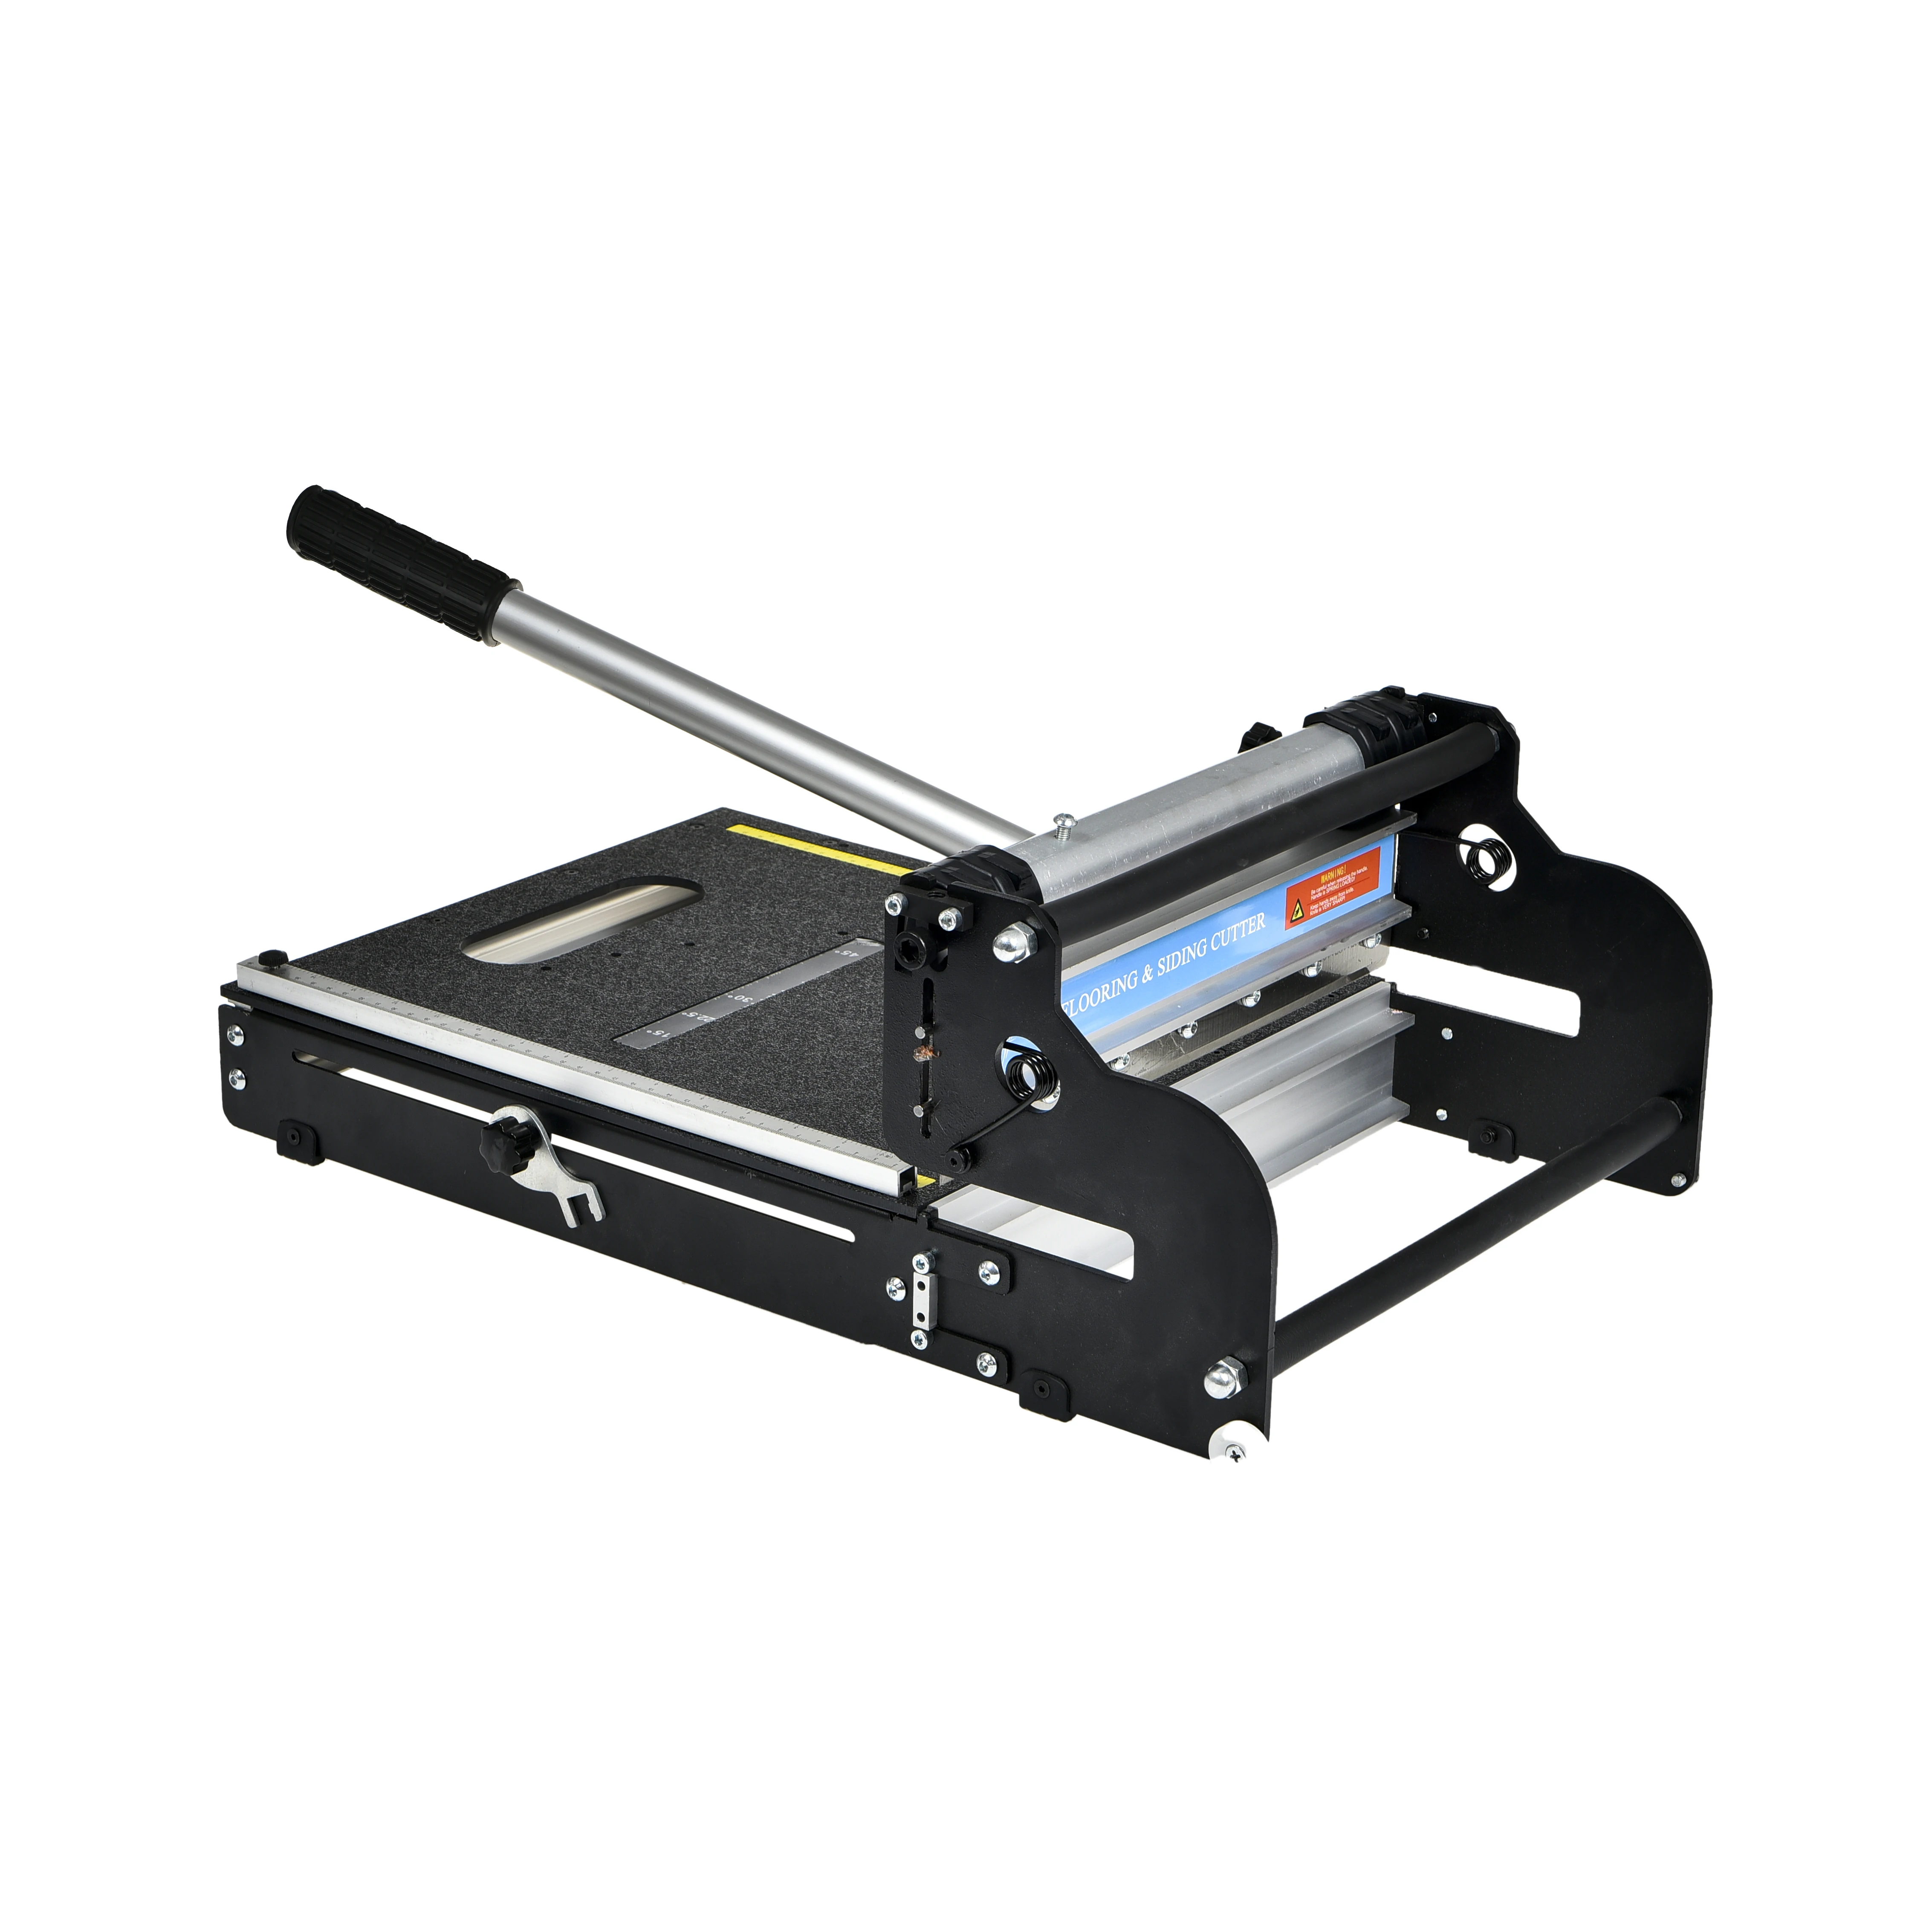 

KS EAGLE KU340 13" Floor Cutter Pro LVP / LVT / VCT / PVC / WPC / Rigid Core Vinyl Plank Cutter And More - Honing Stone Included